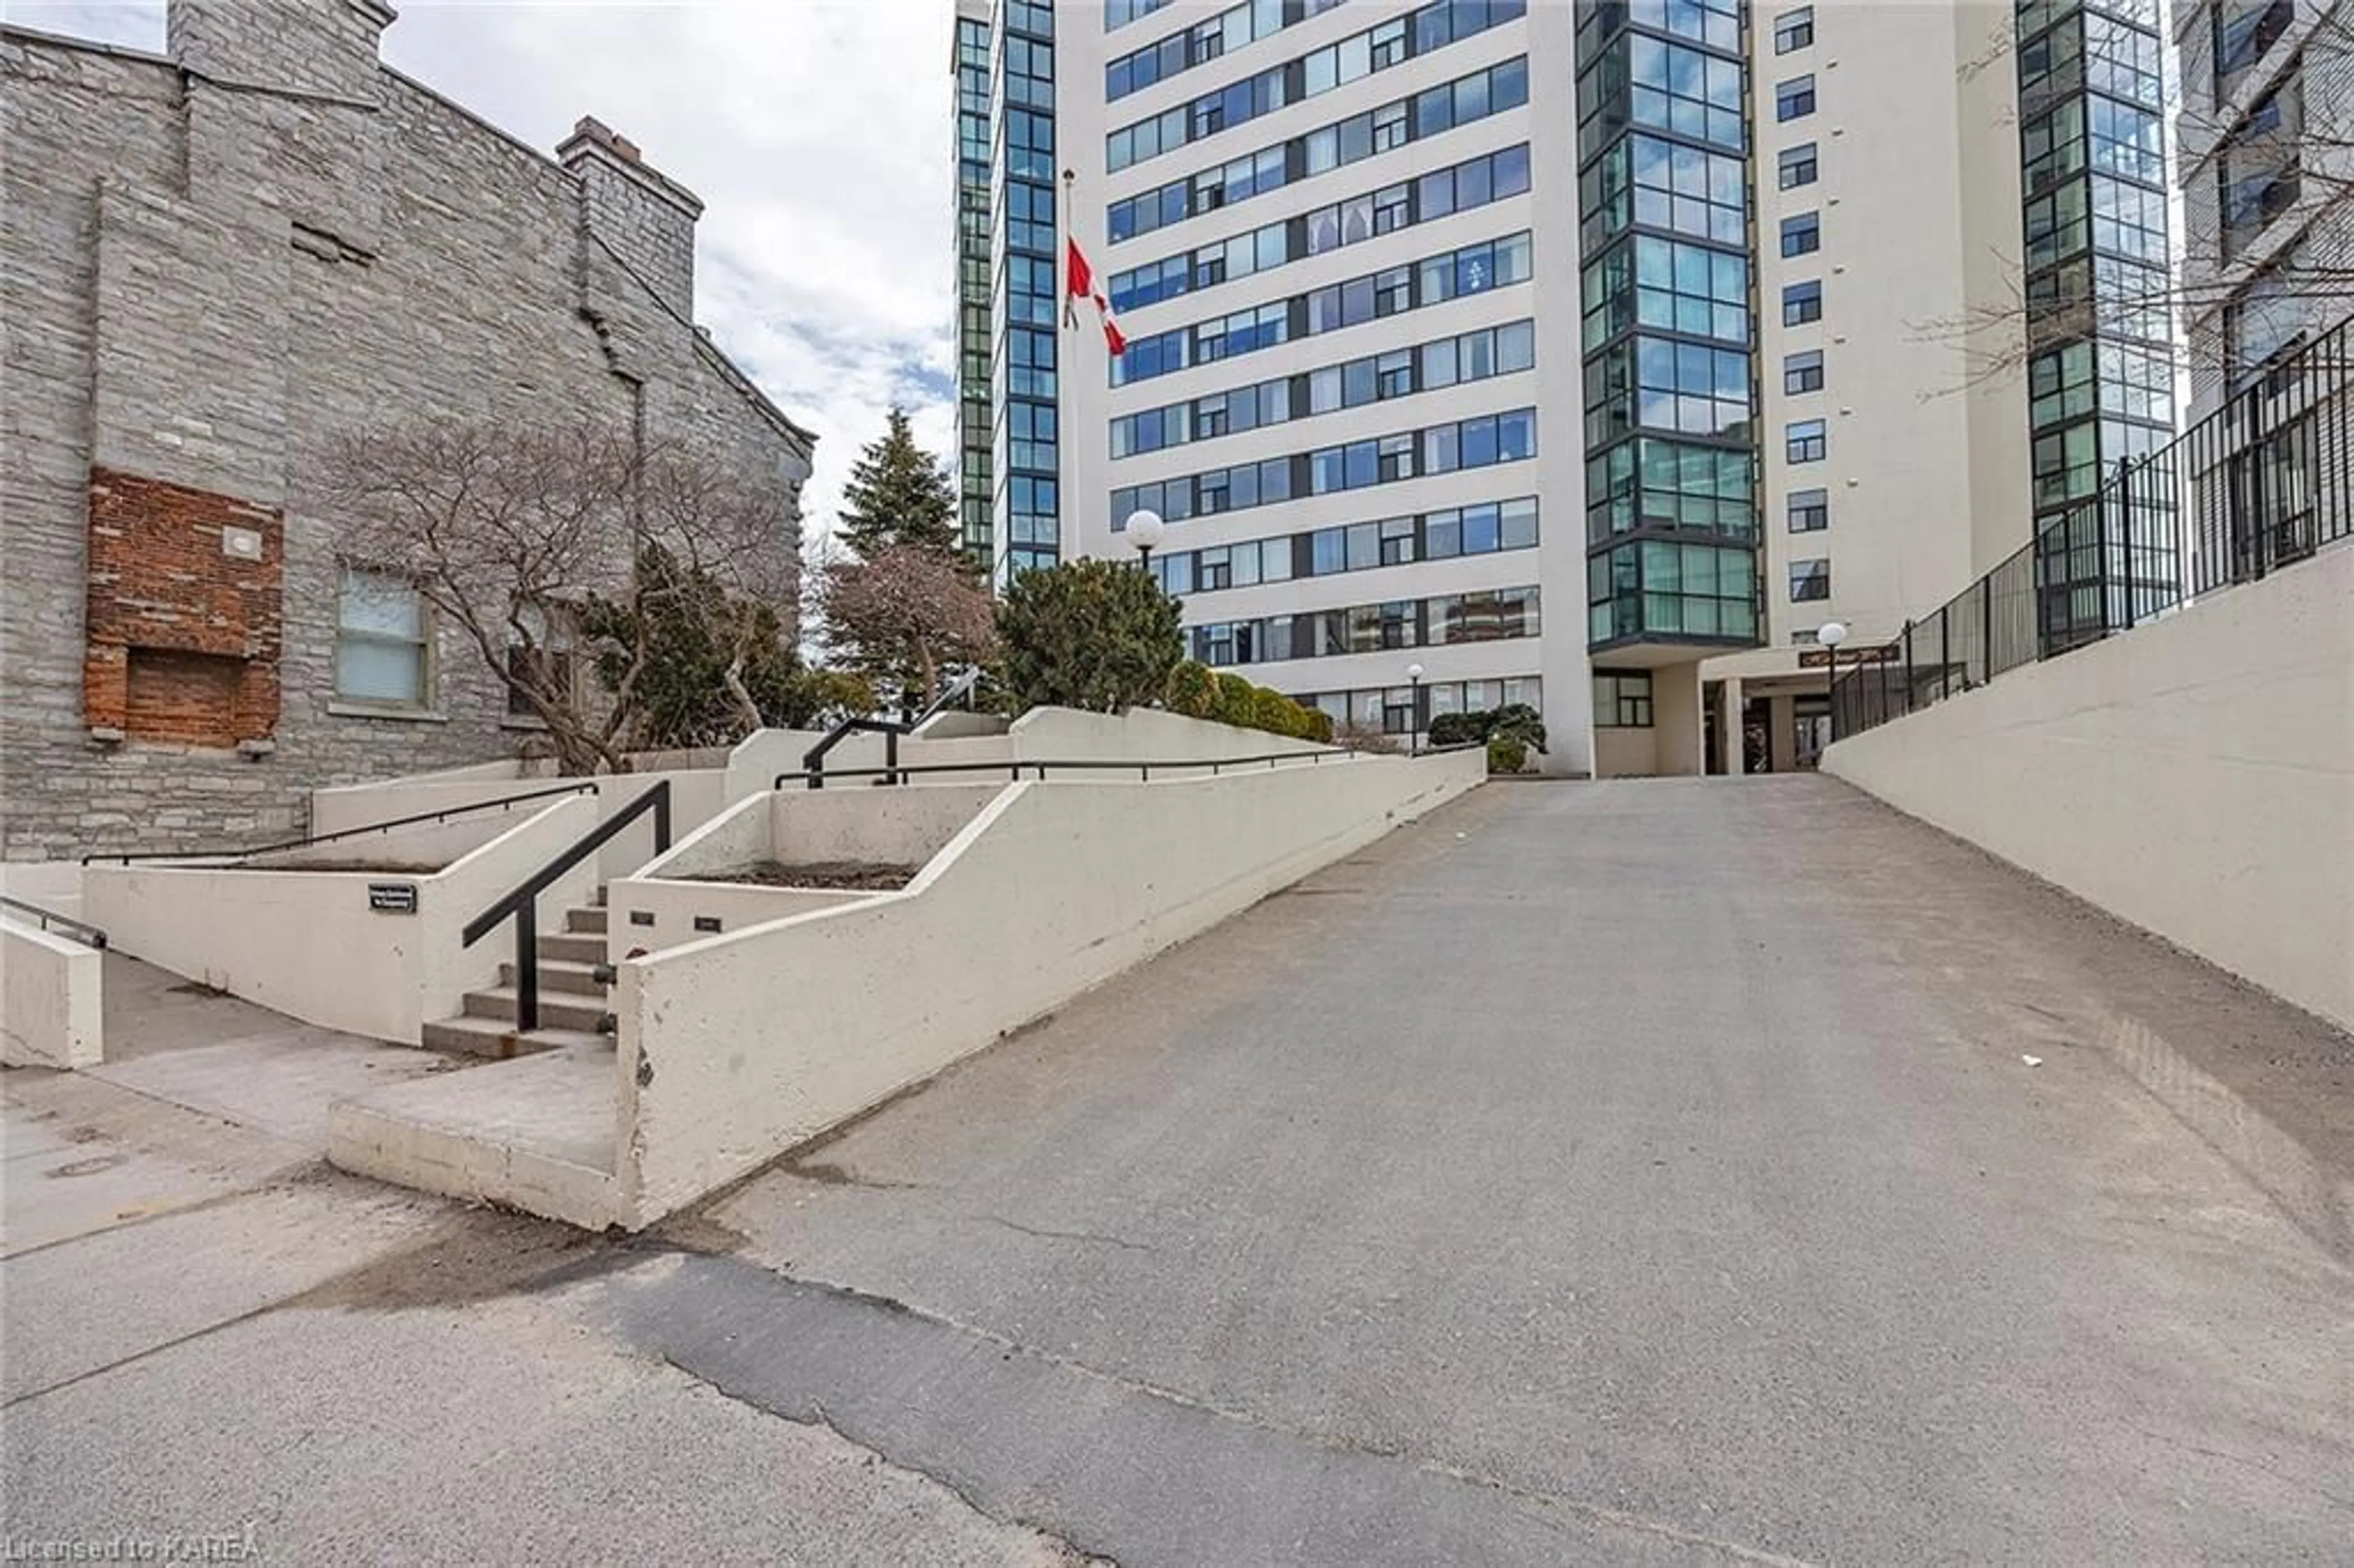 A pic from exterior of the house or condo for 185 Ontario St #1005, Kingston Ontario K7L 2Y7